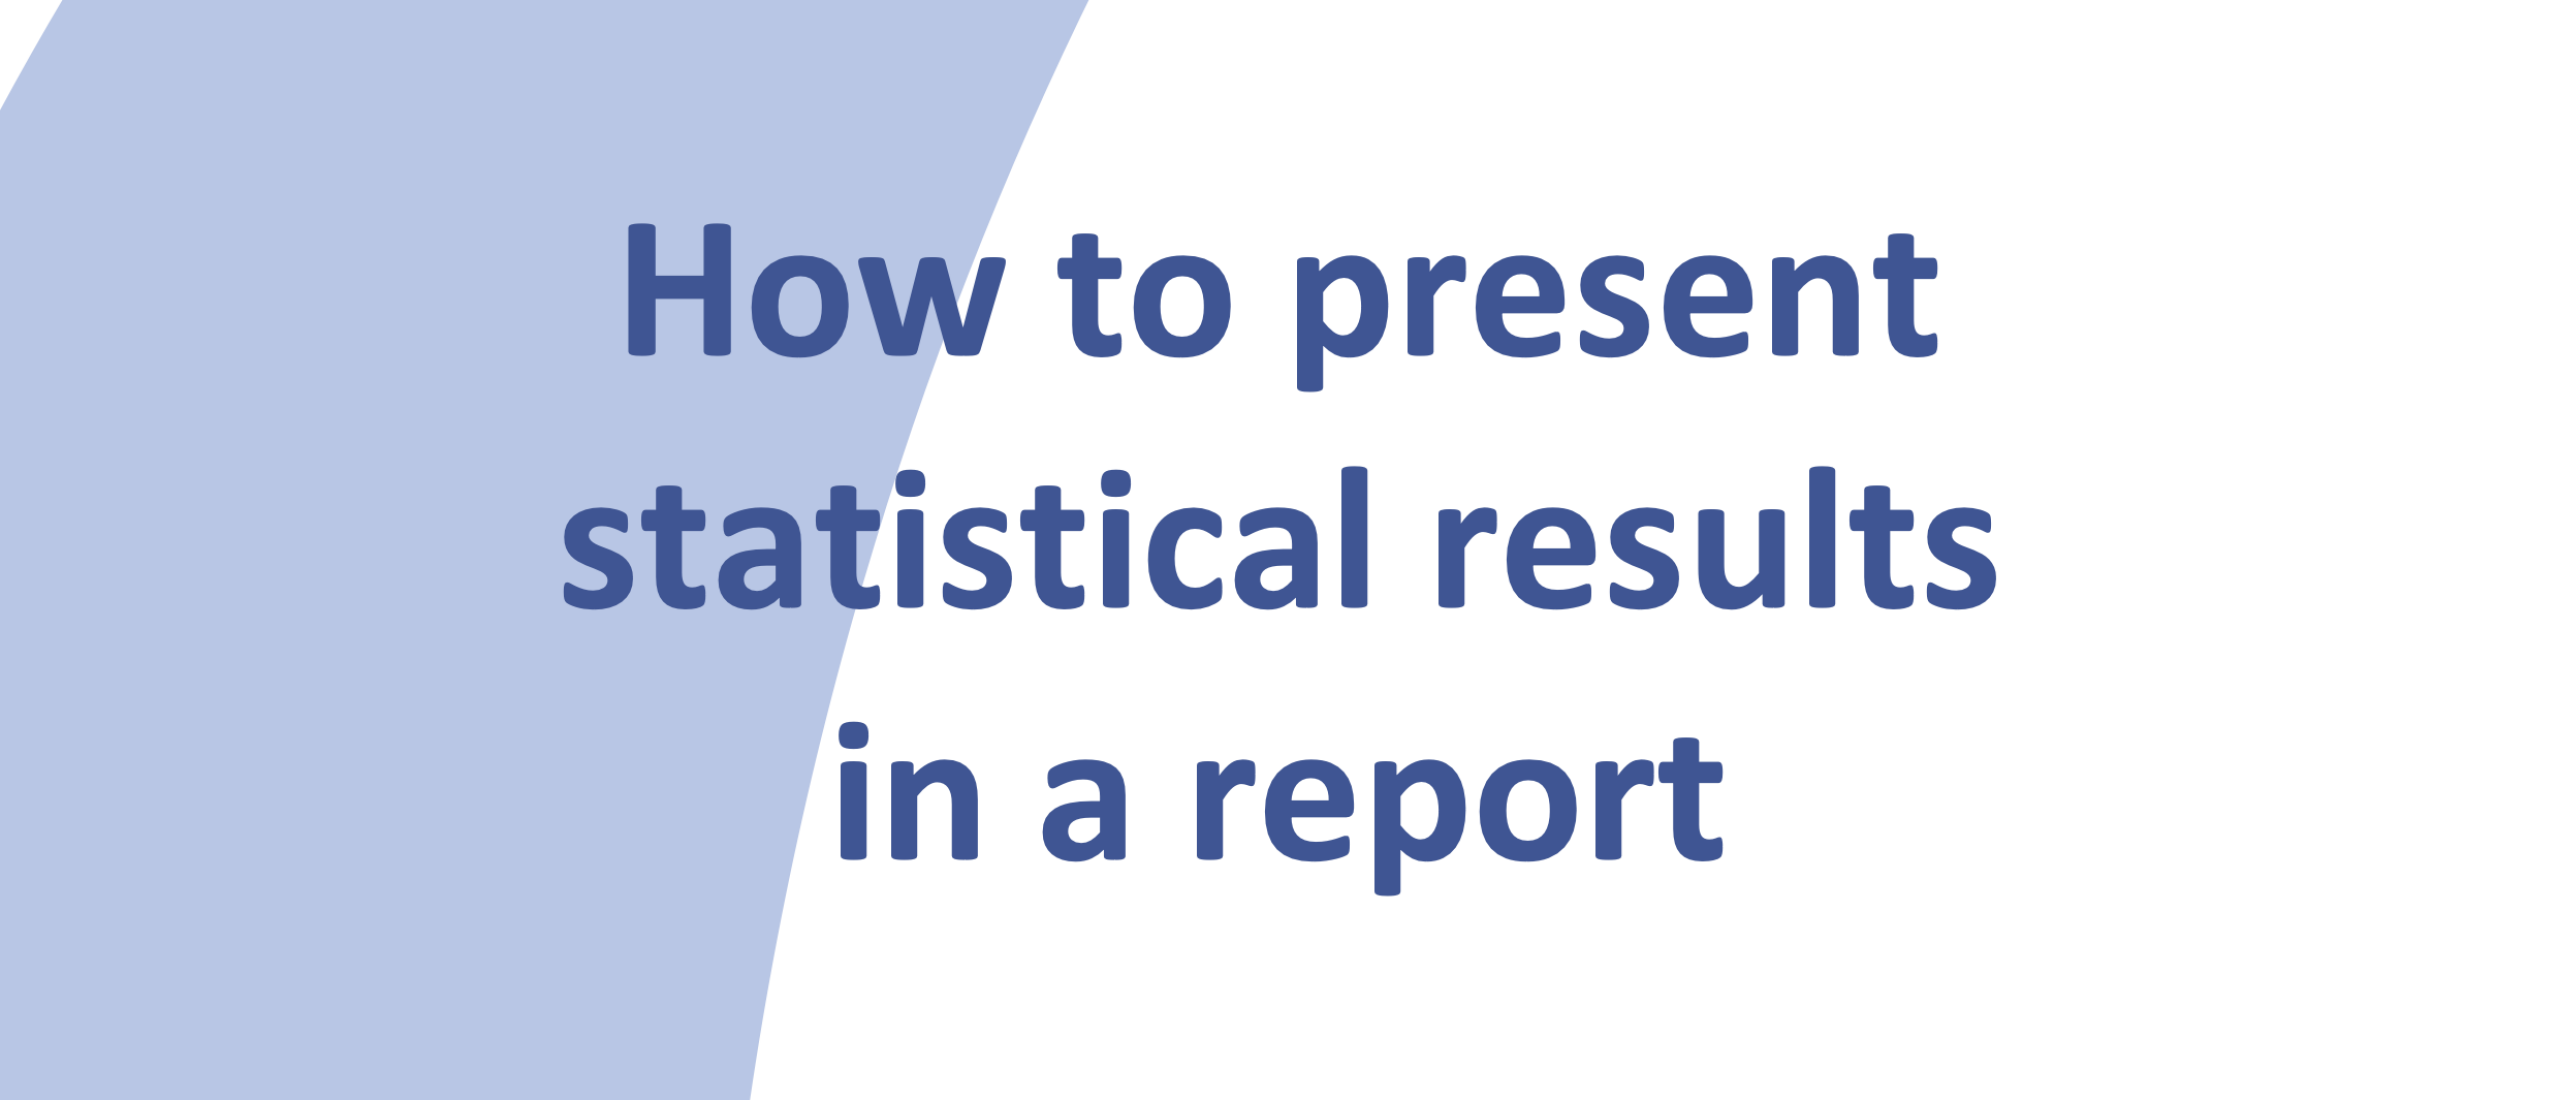 How to Present Statistical Results in a Report